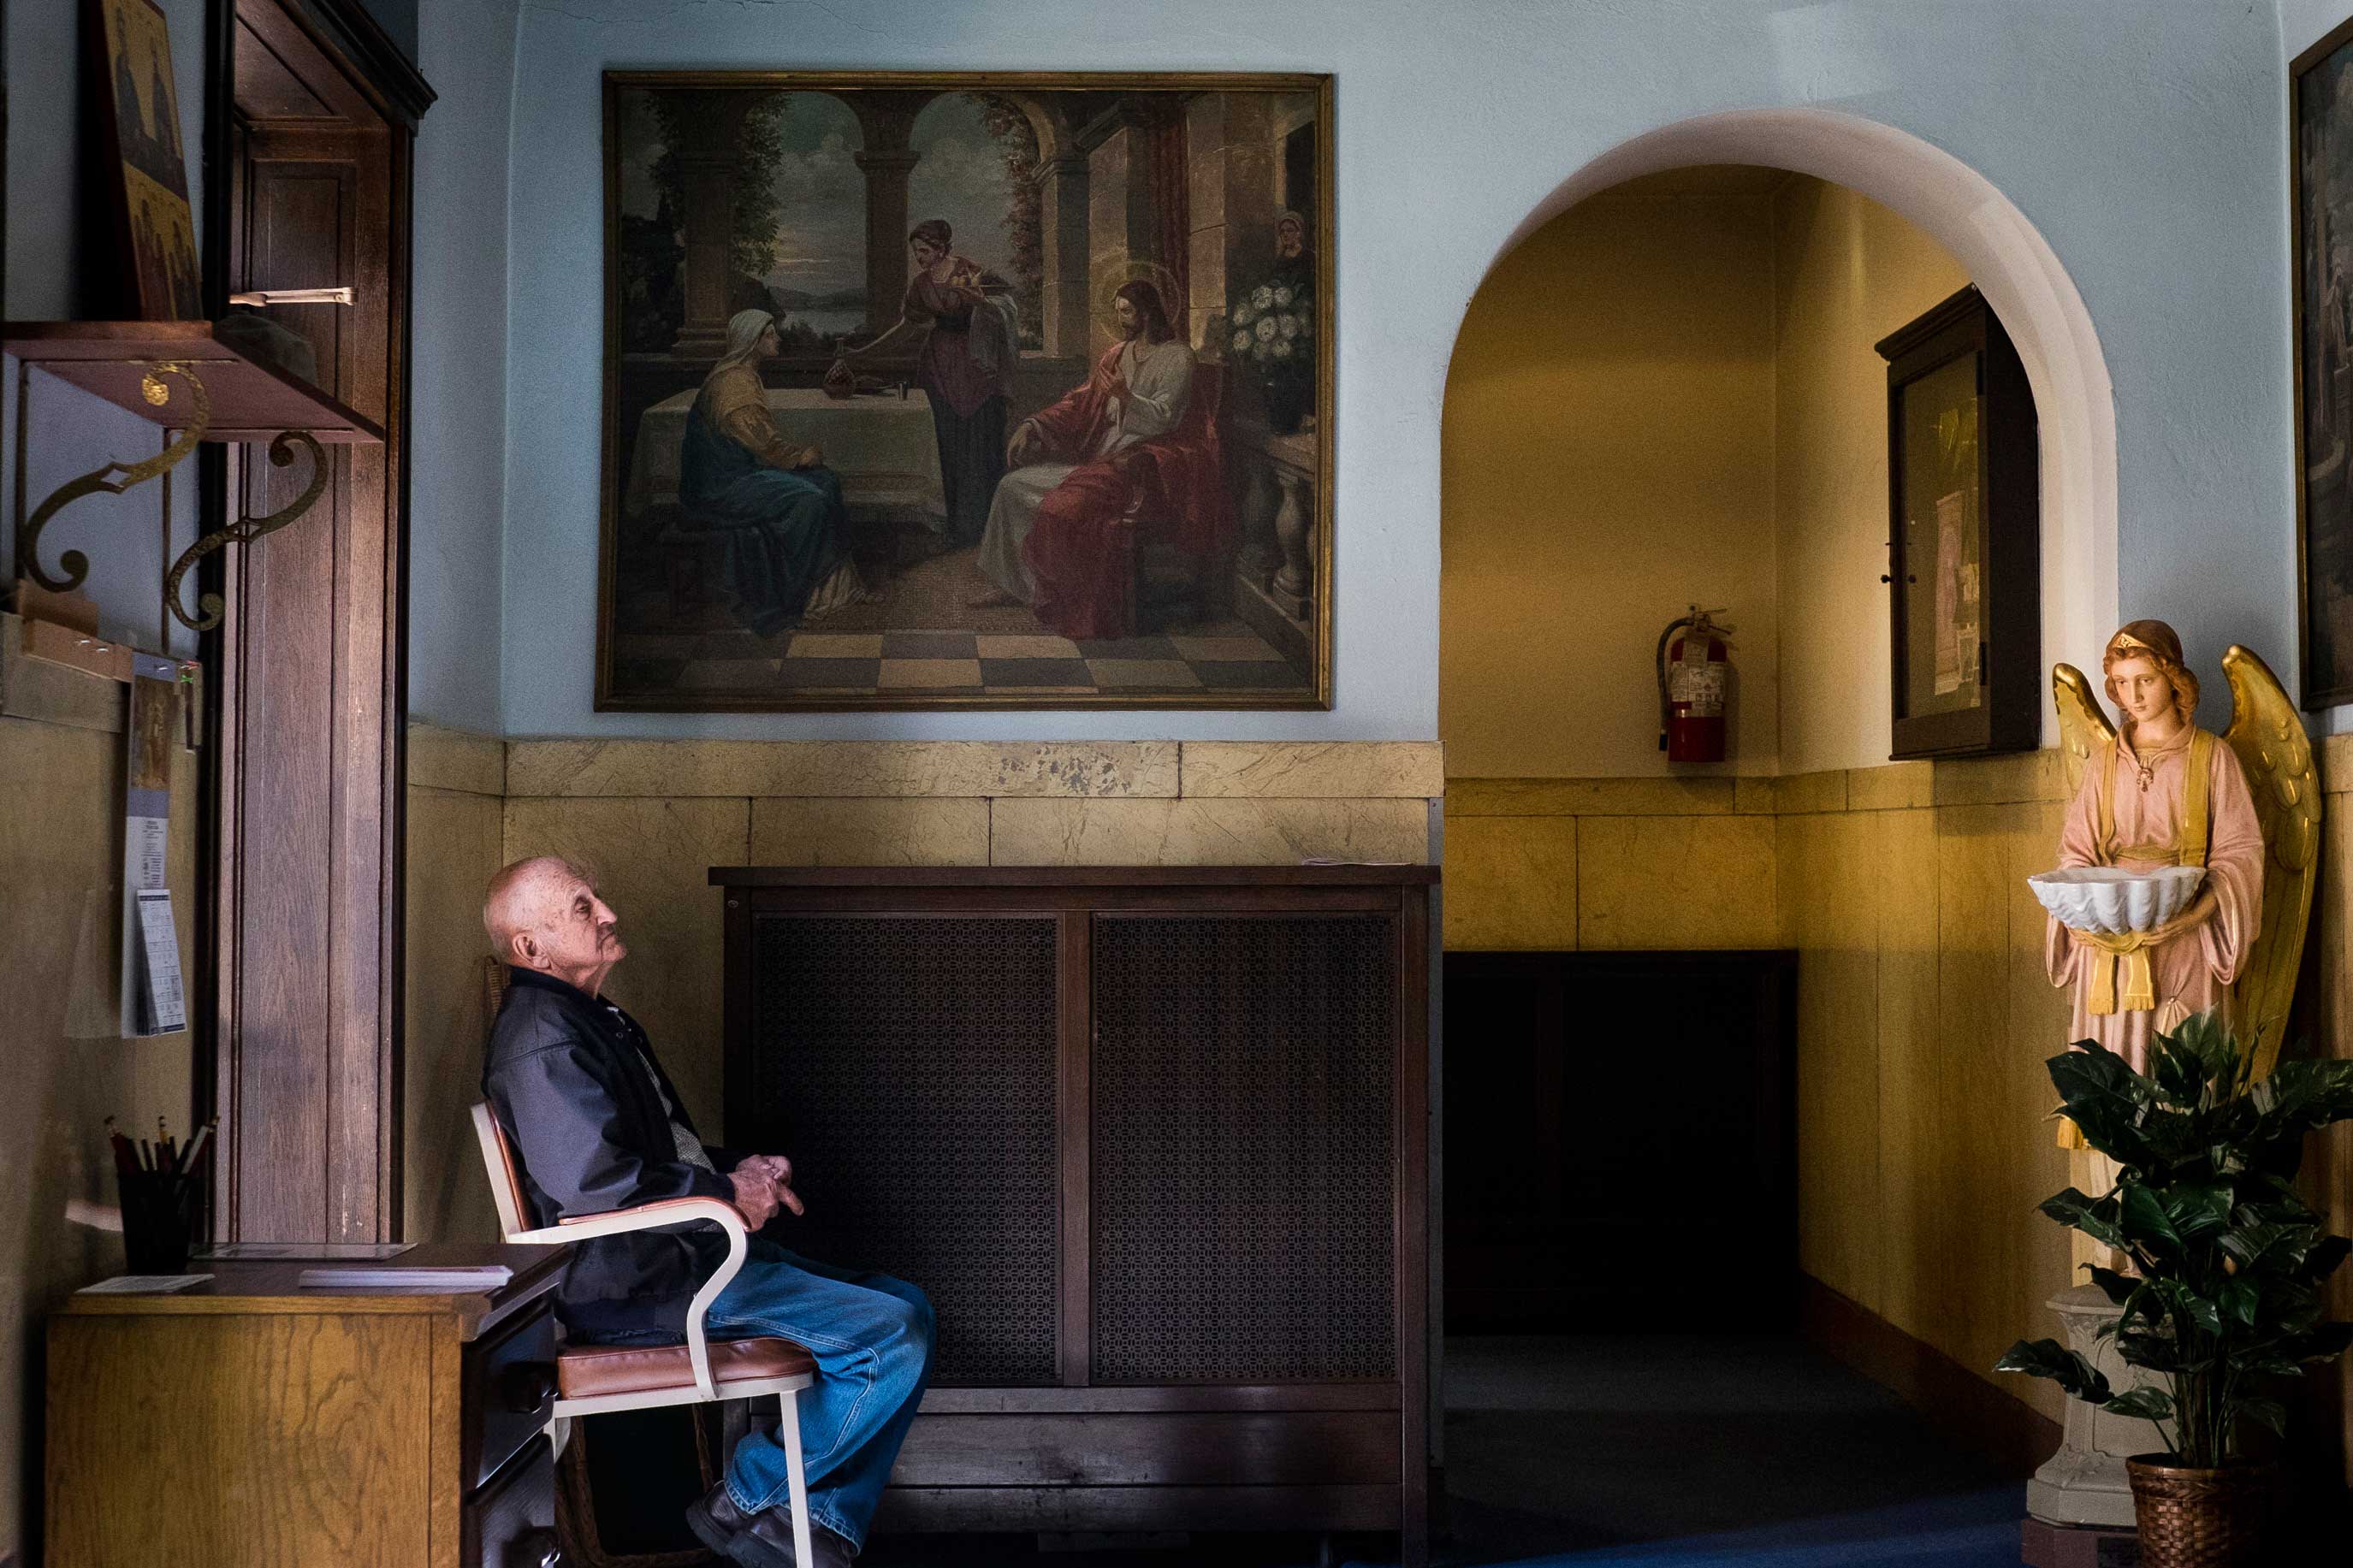 A parishioner sits in the entrance to the church during Sunday Service at Saints Peter and Paul Byzantine Catholic Church in Braddock, Pa.